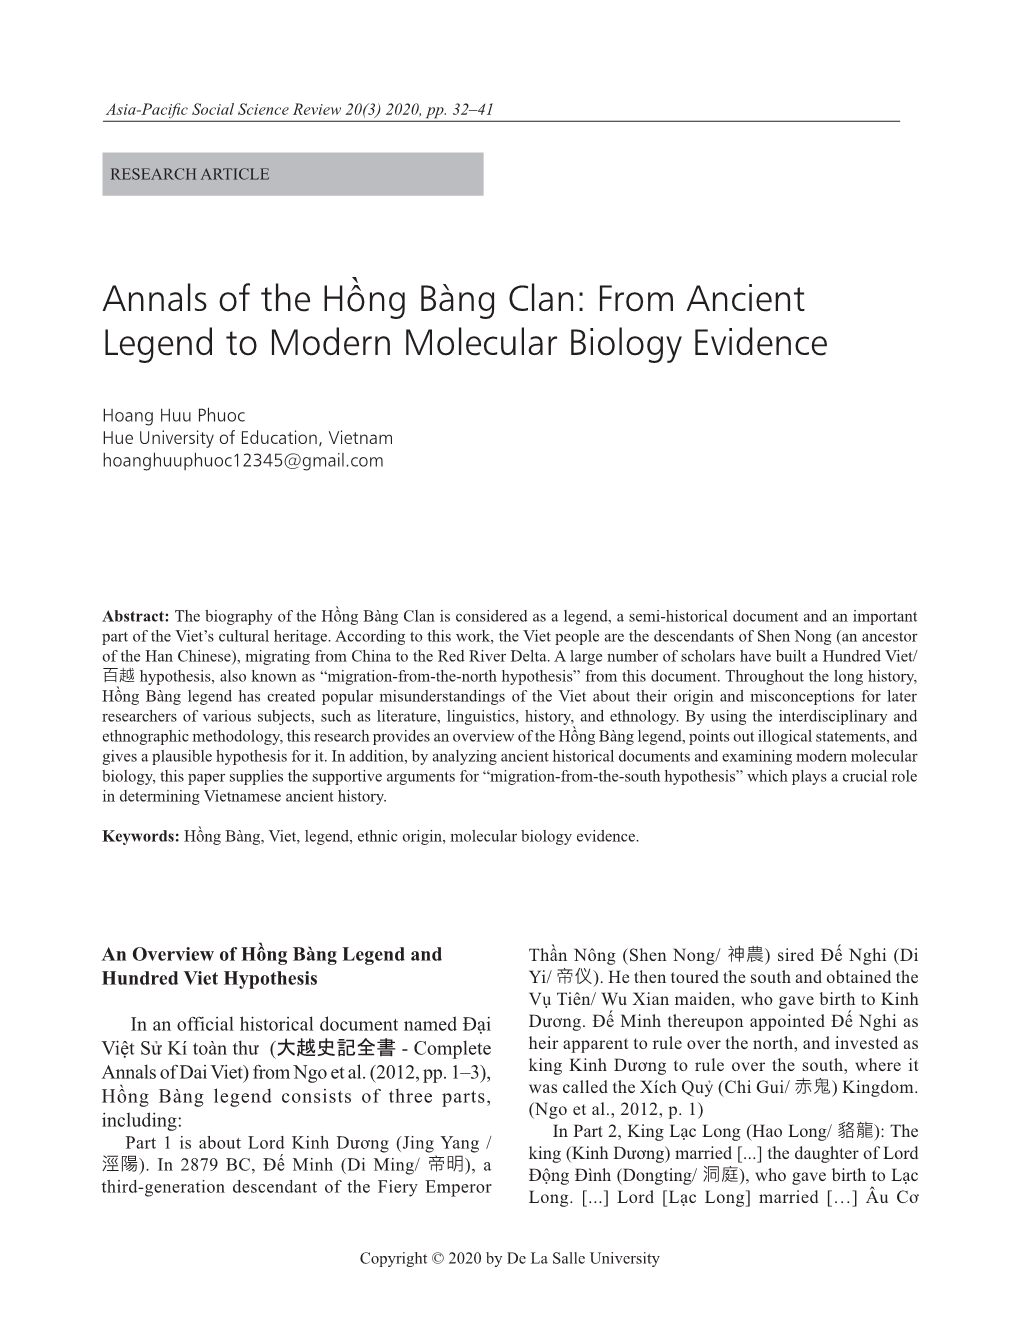 From Ancient Legend to Modern Molecular Biology Evidence